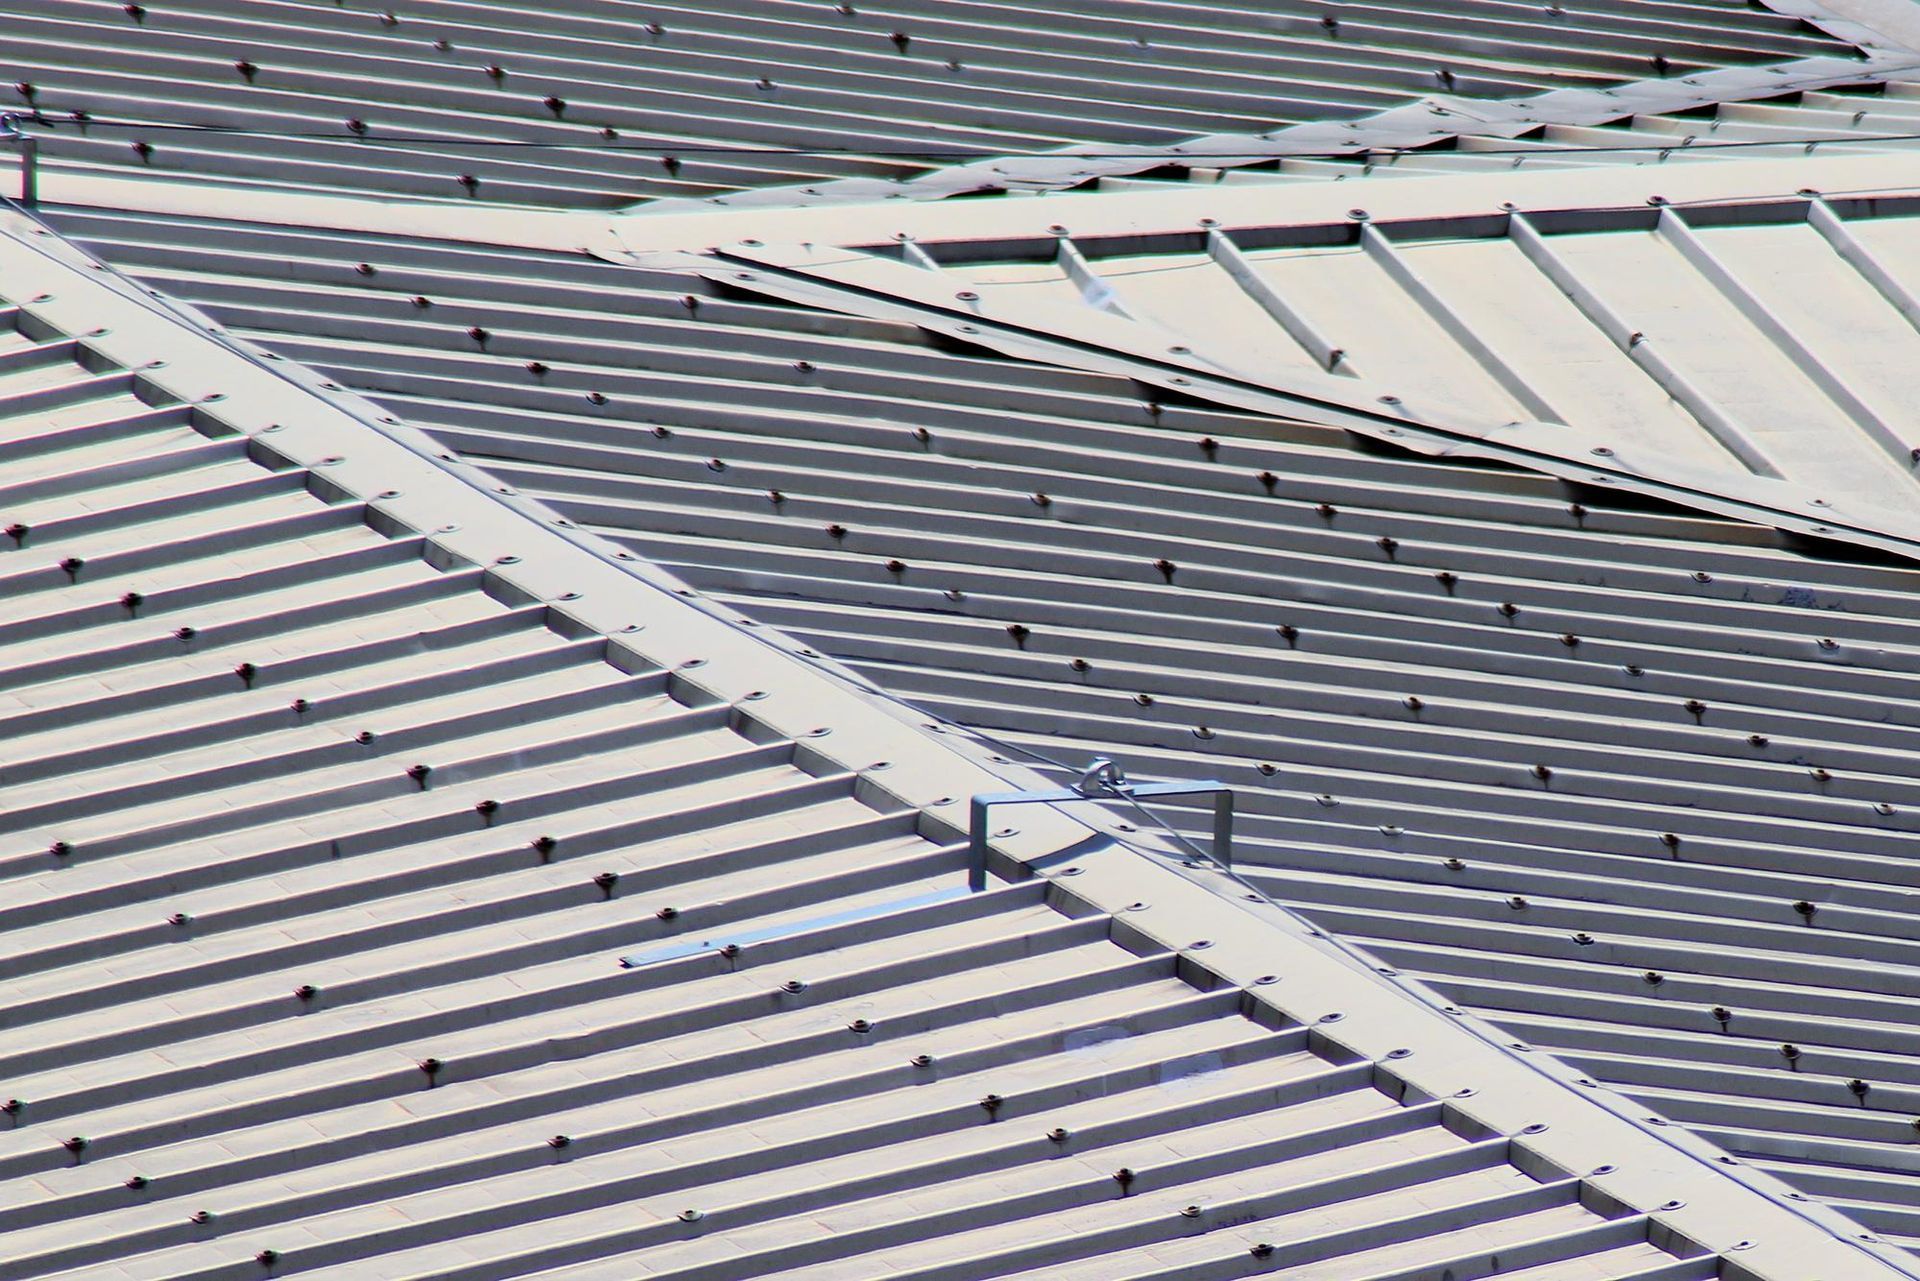 a close up of a roof with a striped pattern